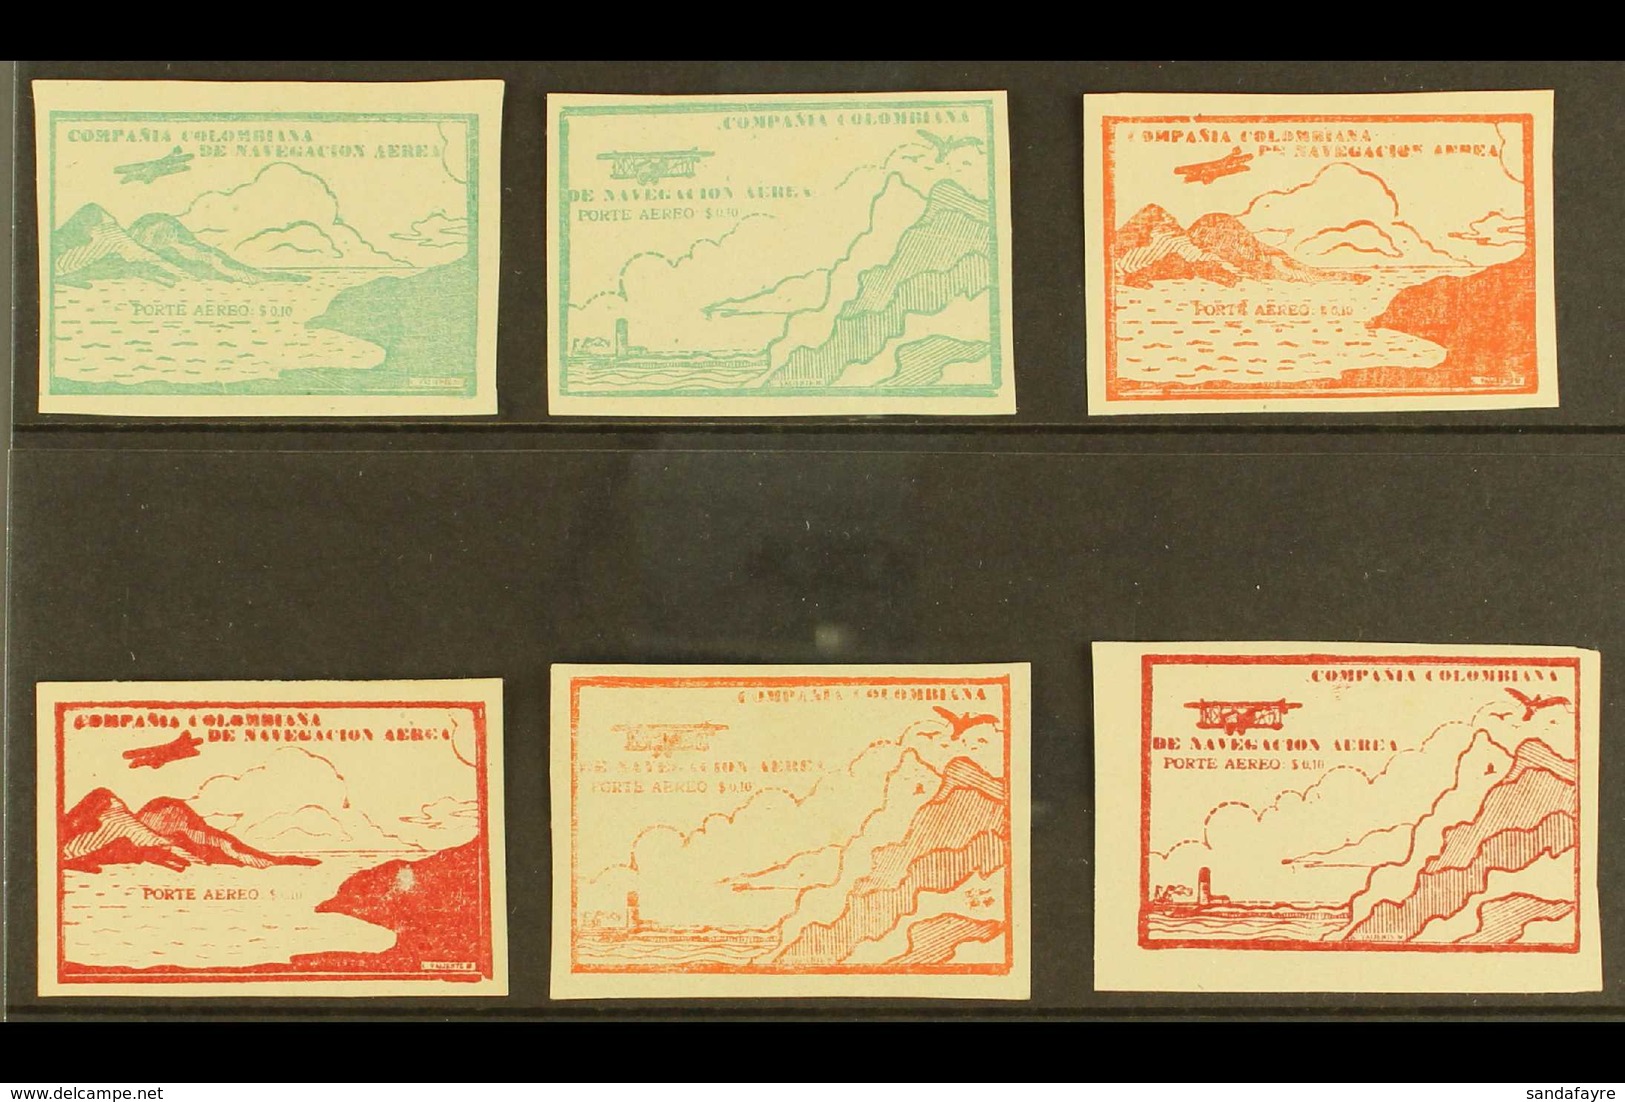 PRIVATE AIR COMPANY 1920 Complete Set With Listed Shades, SG 11/14a, Unused & Without Gum As Issued (6 Stamps) For More  - Colombia